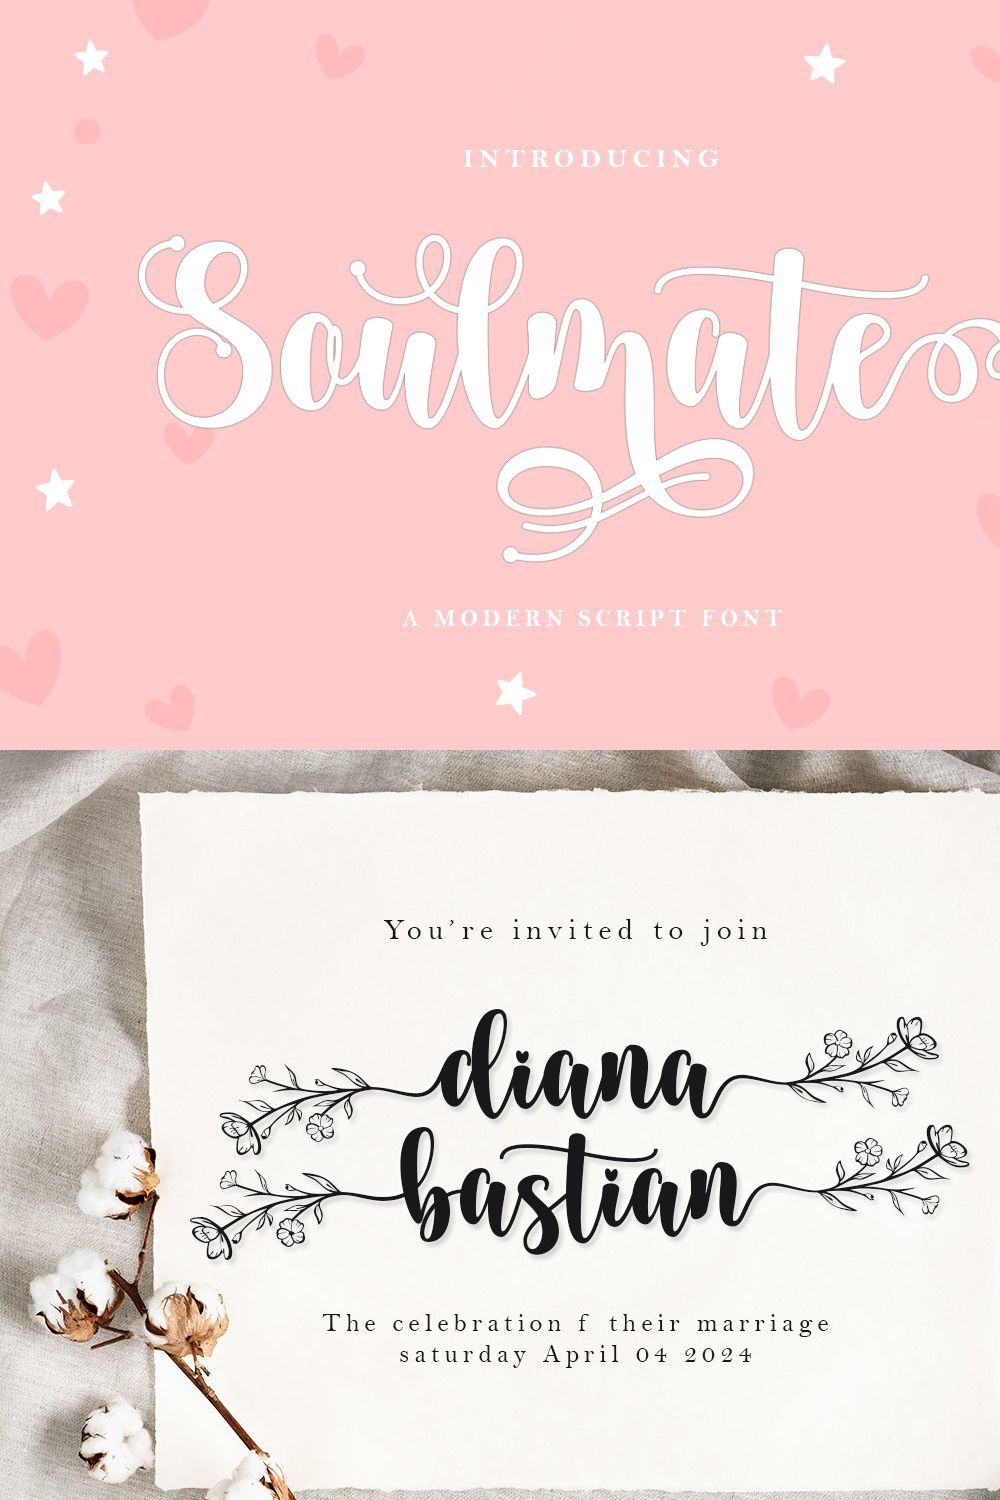 Soulmate pinterest preview image.